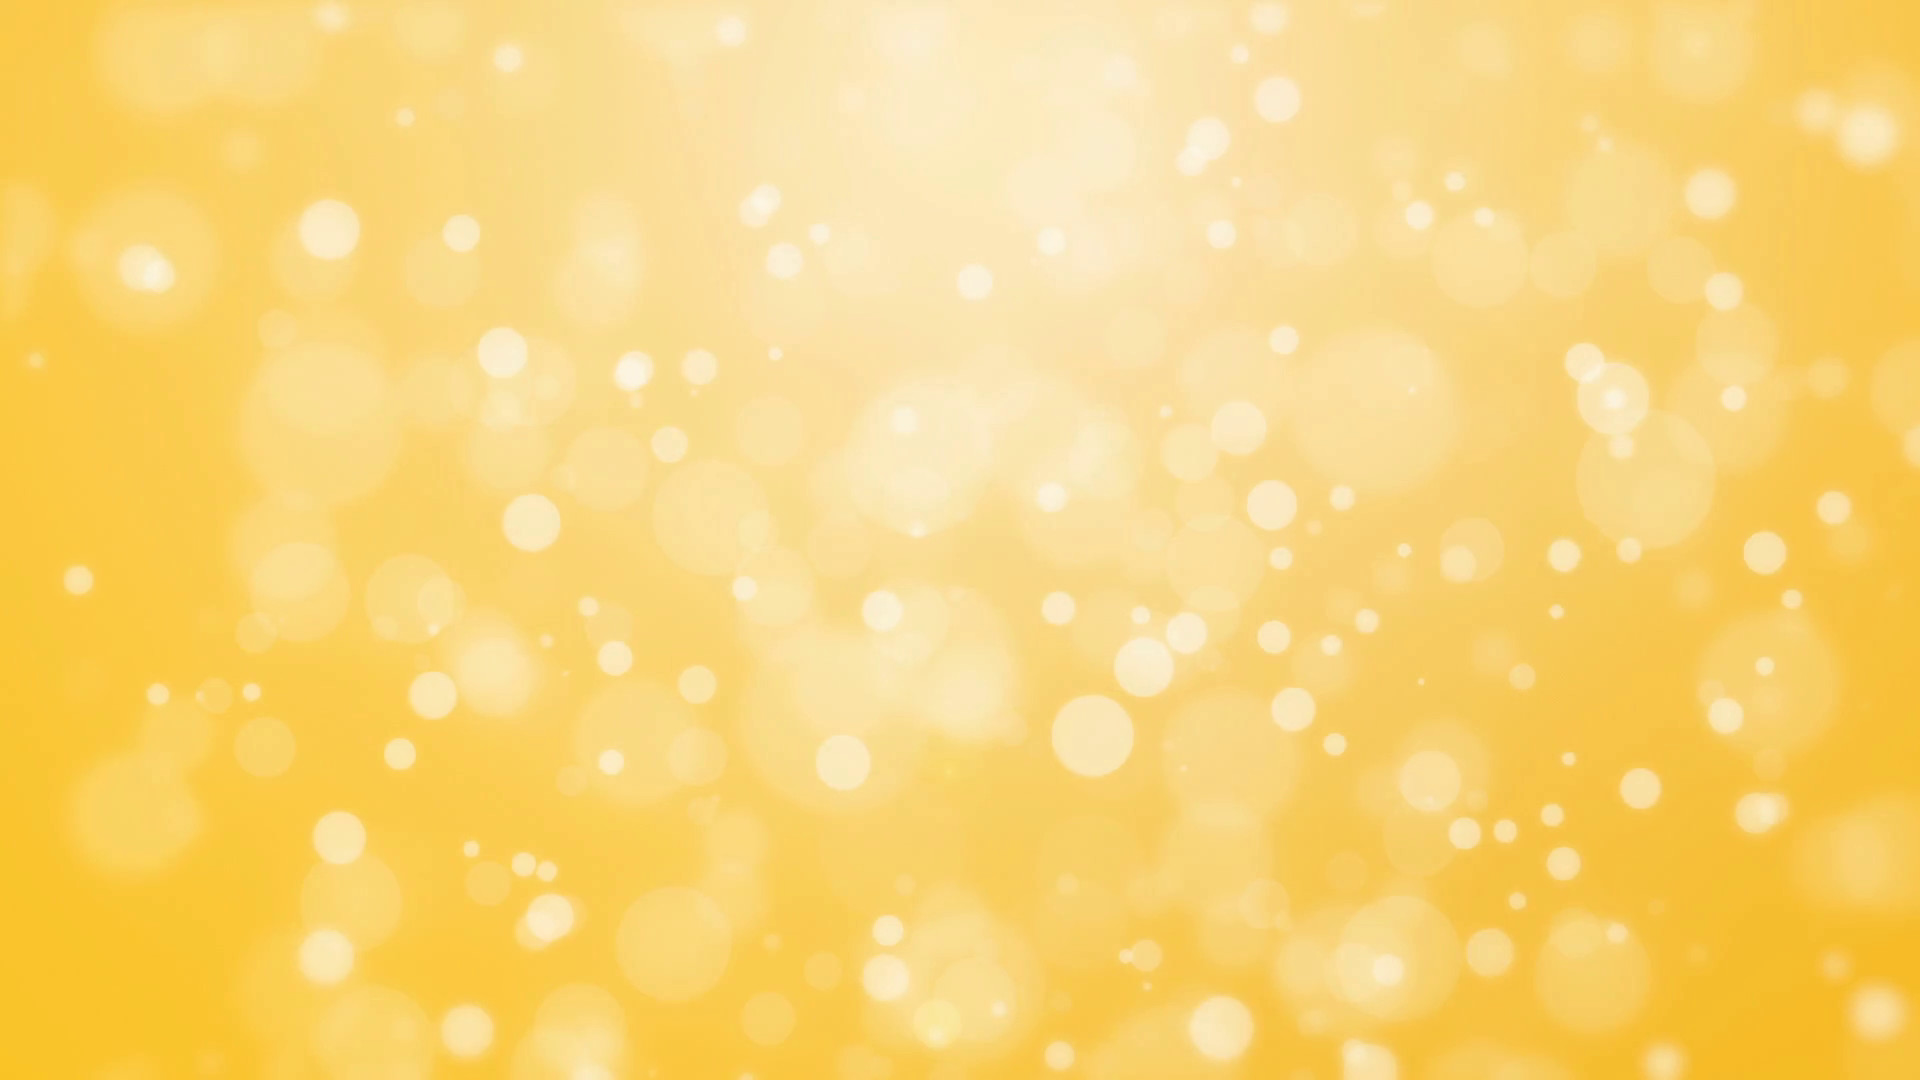 1920x1080 Cheerful golden yellow bokeh background with floating glowing lights Motion  Background - VideoBlocks